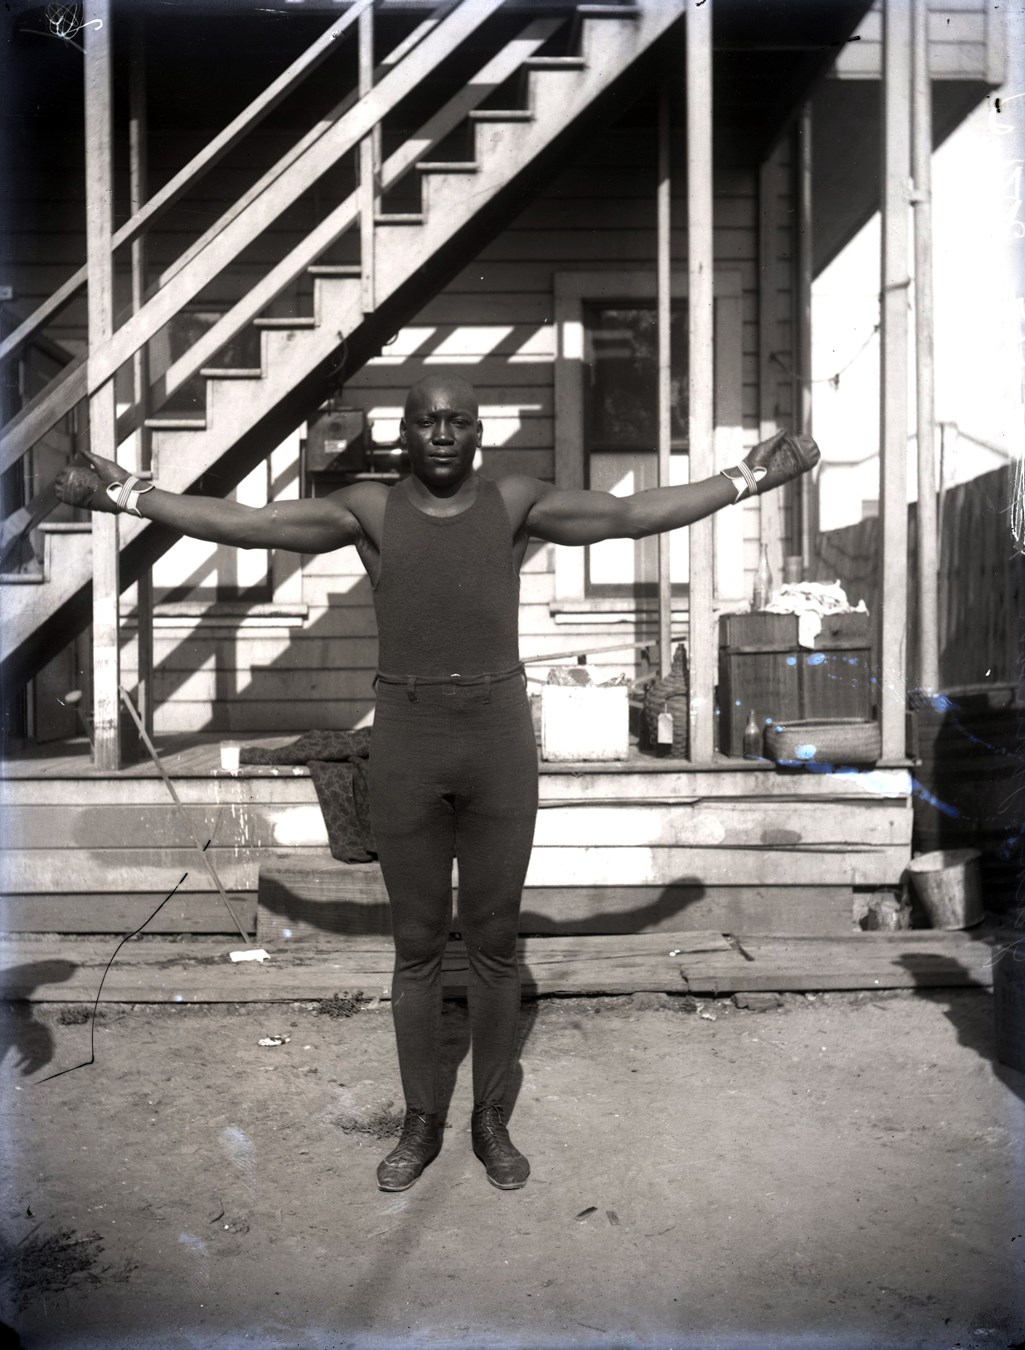 Dana Collection Of Important Boxing Negatives - 1910 Jack Johnson "Prepping for Jeffries Battle" Type I Glass Plate Negative by Dana Studio